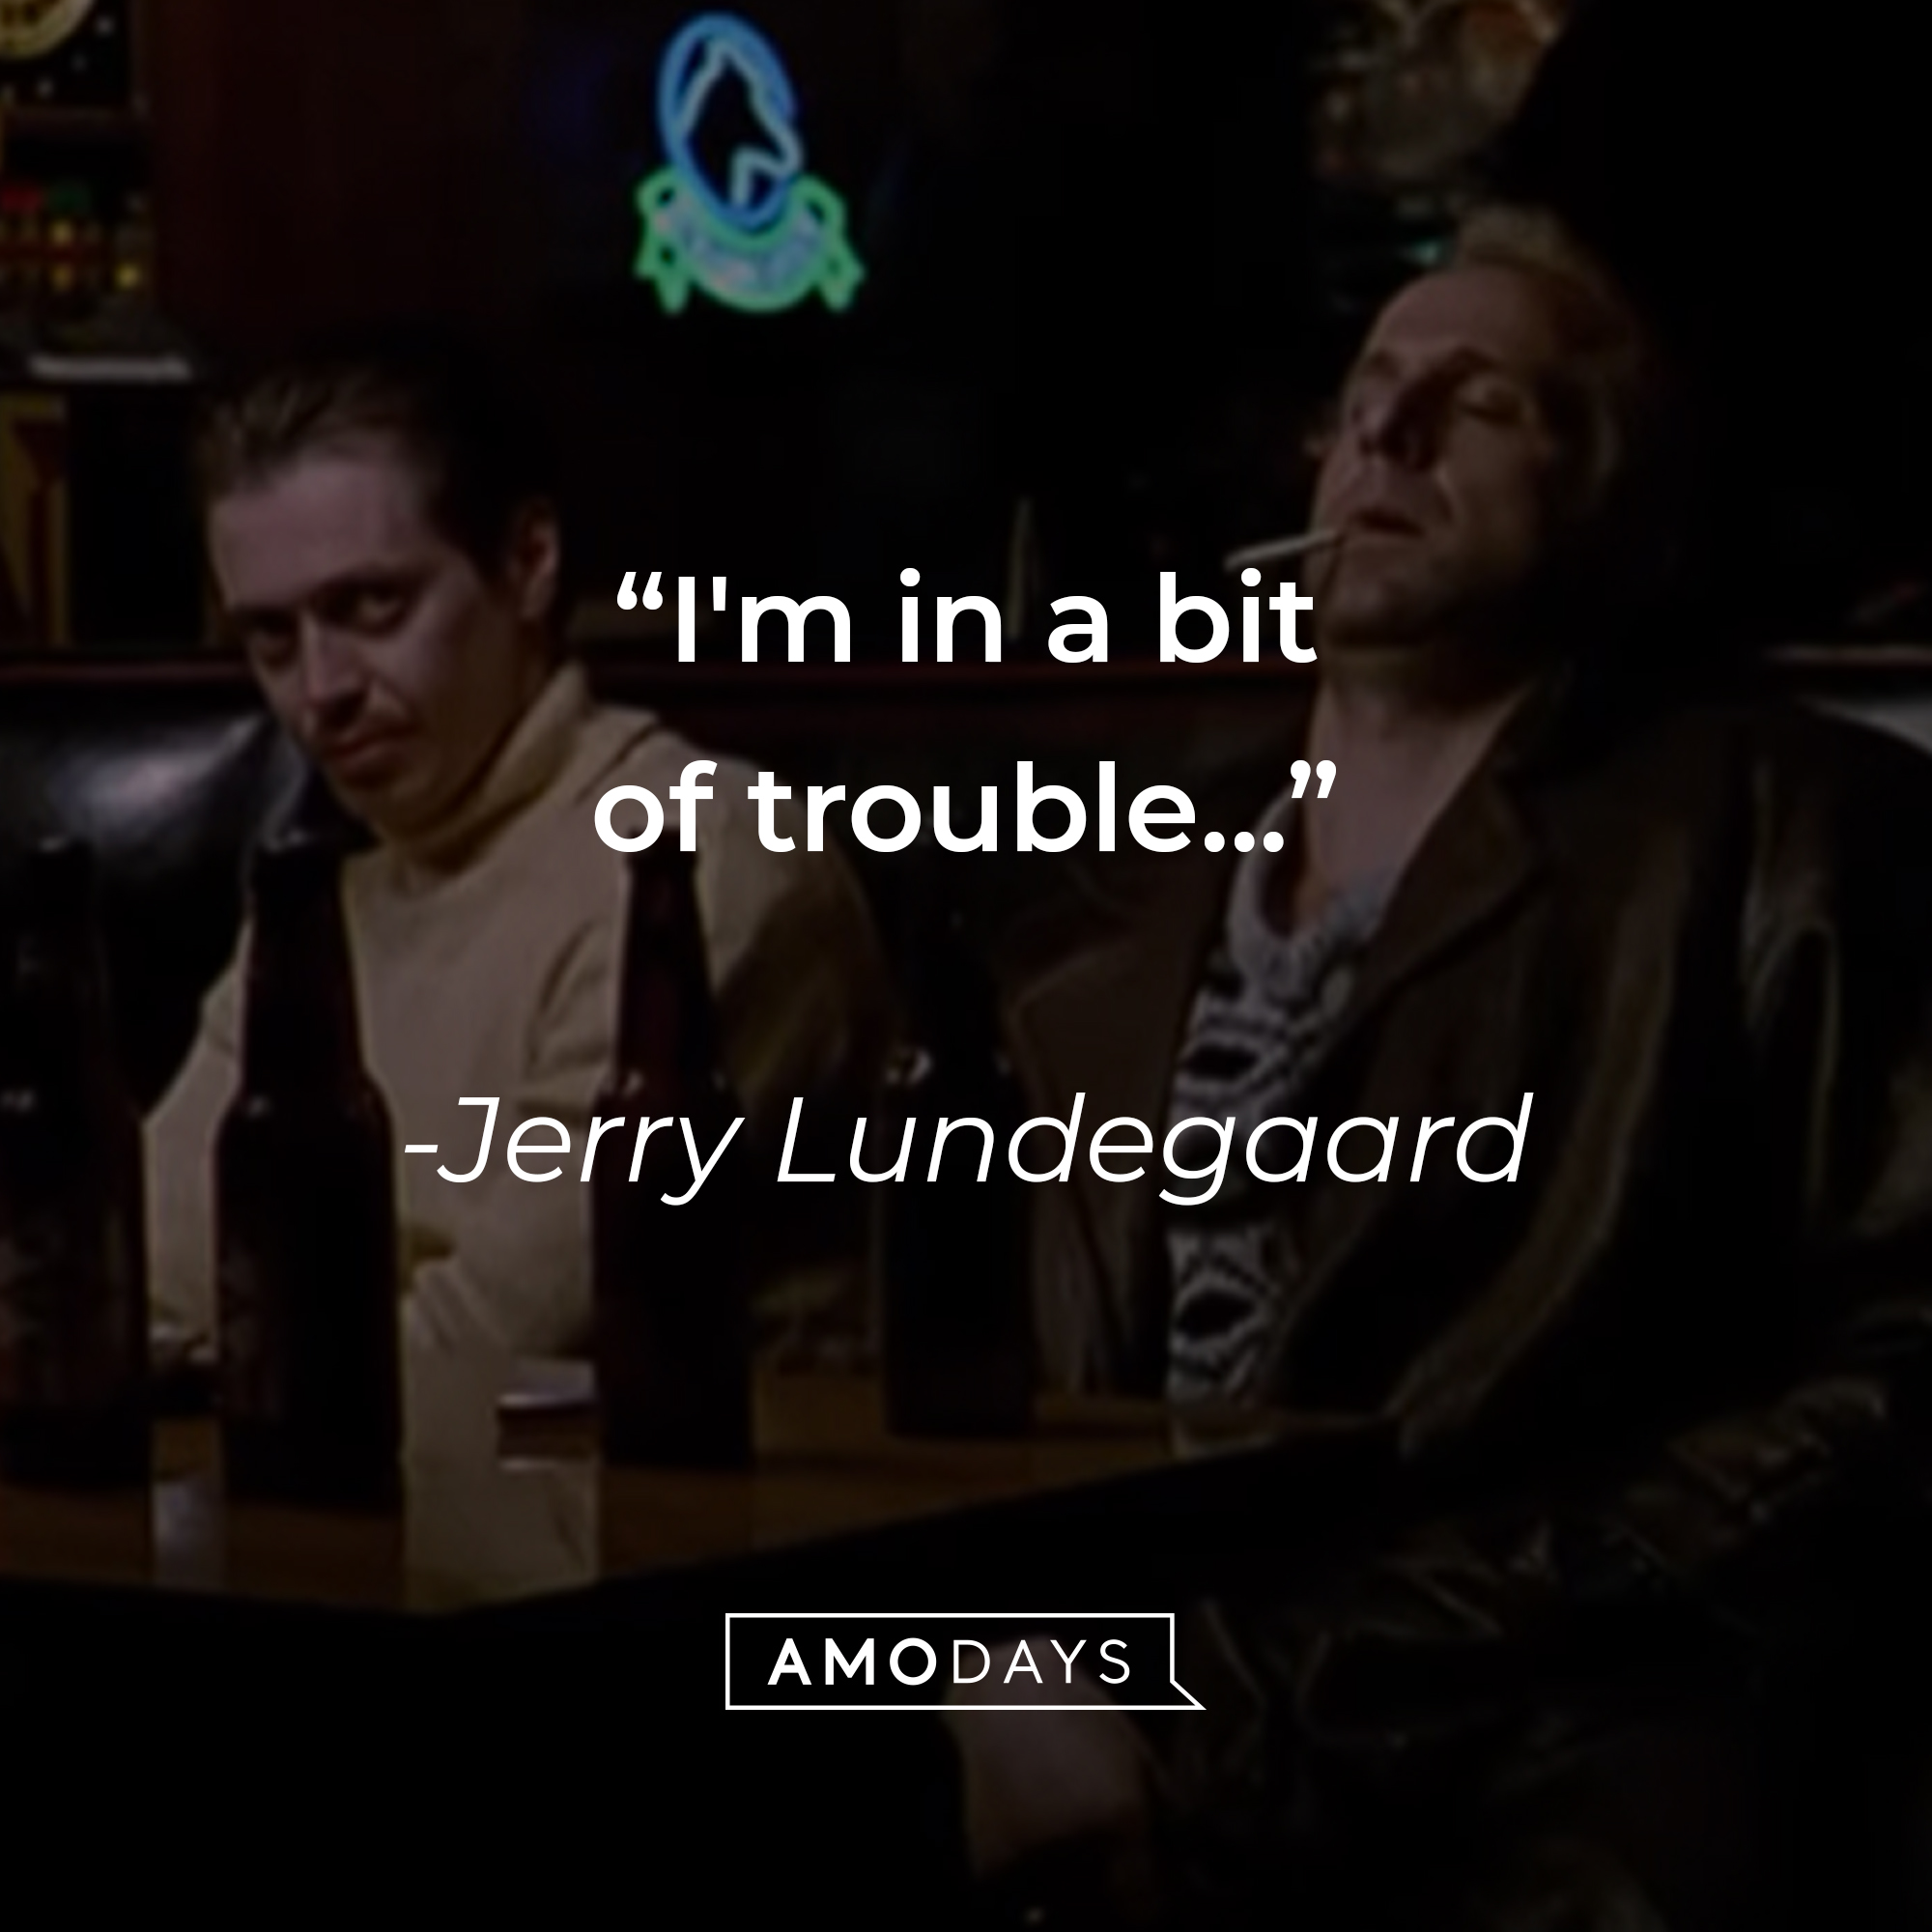 Jerry Lundegaard's quote: "I'm in a bit of trouble..." | Source: youtube.com/MGMStudios